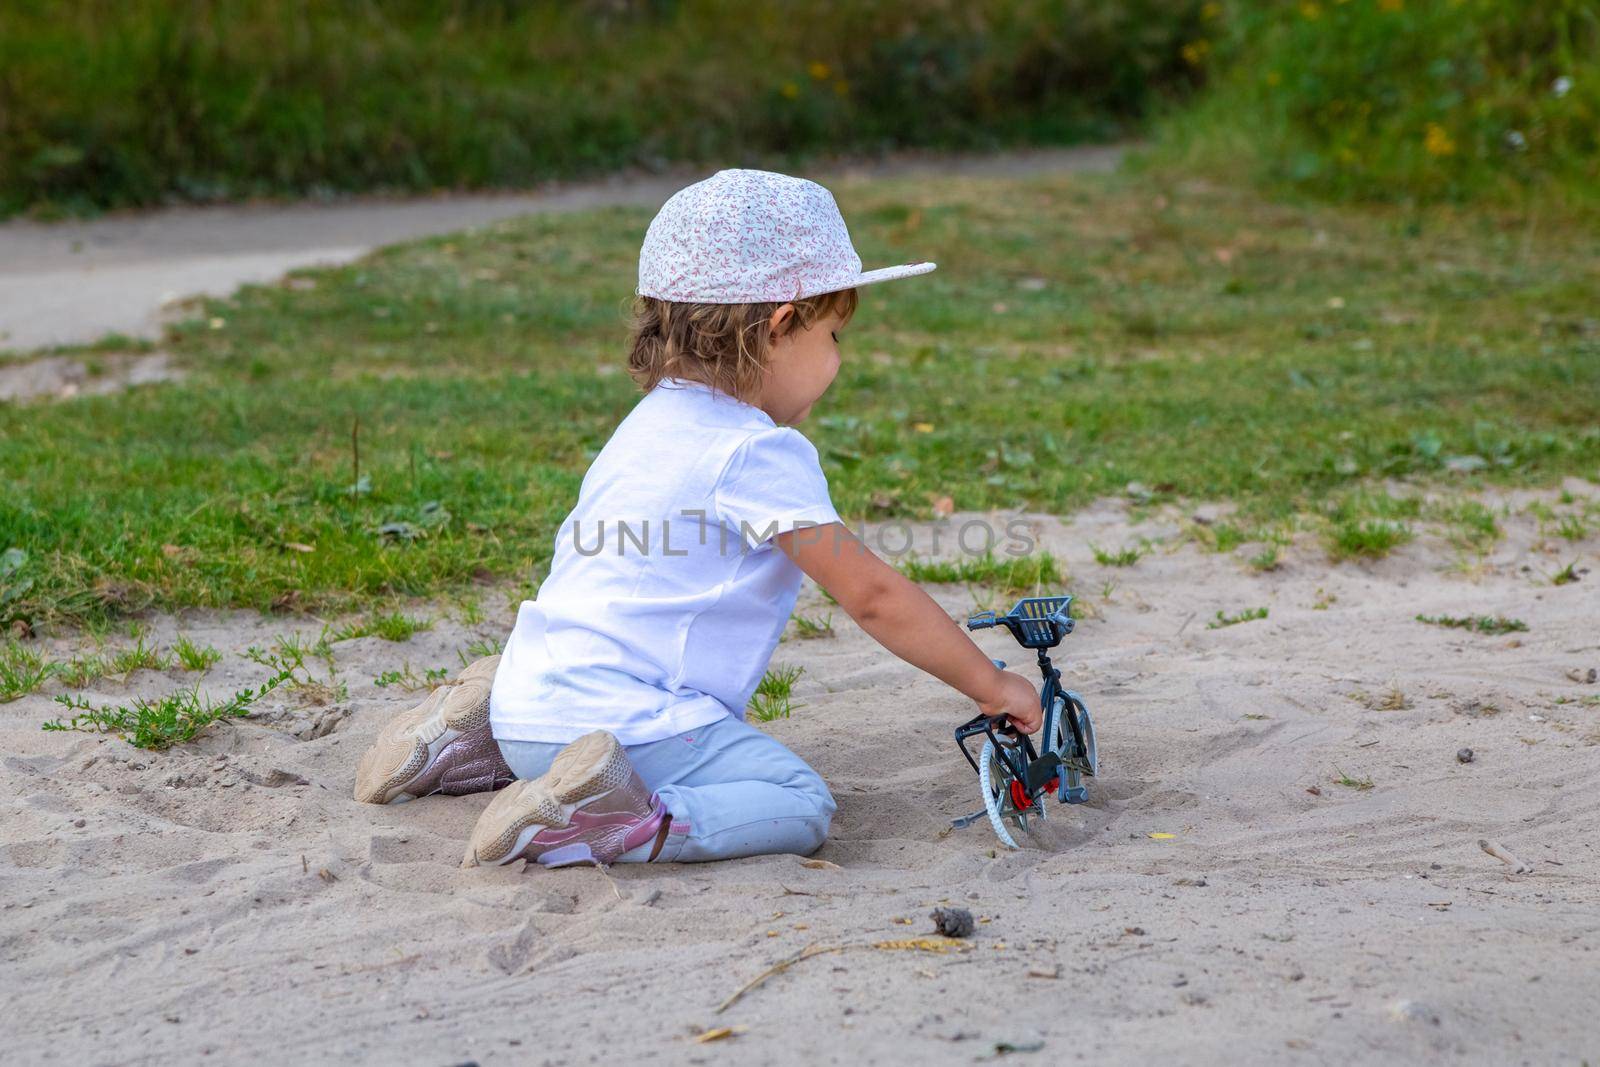 adorable toddler plays with a toy bike in nature. child on all fours in the sand on the lawn.